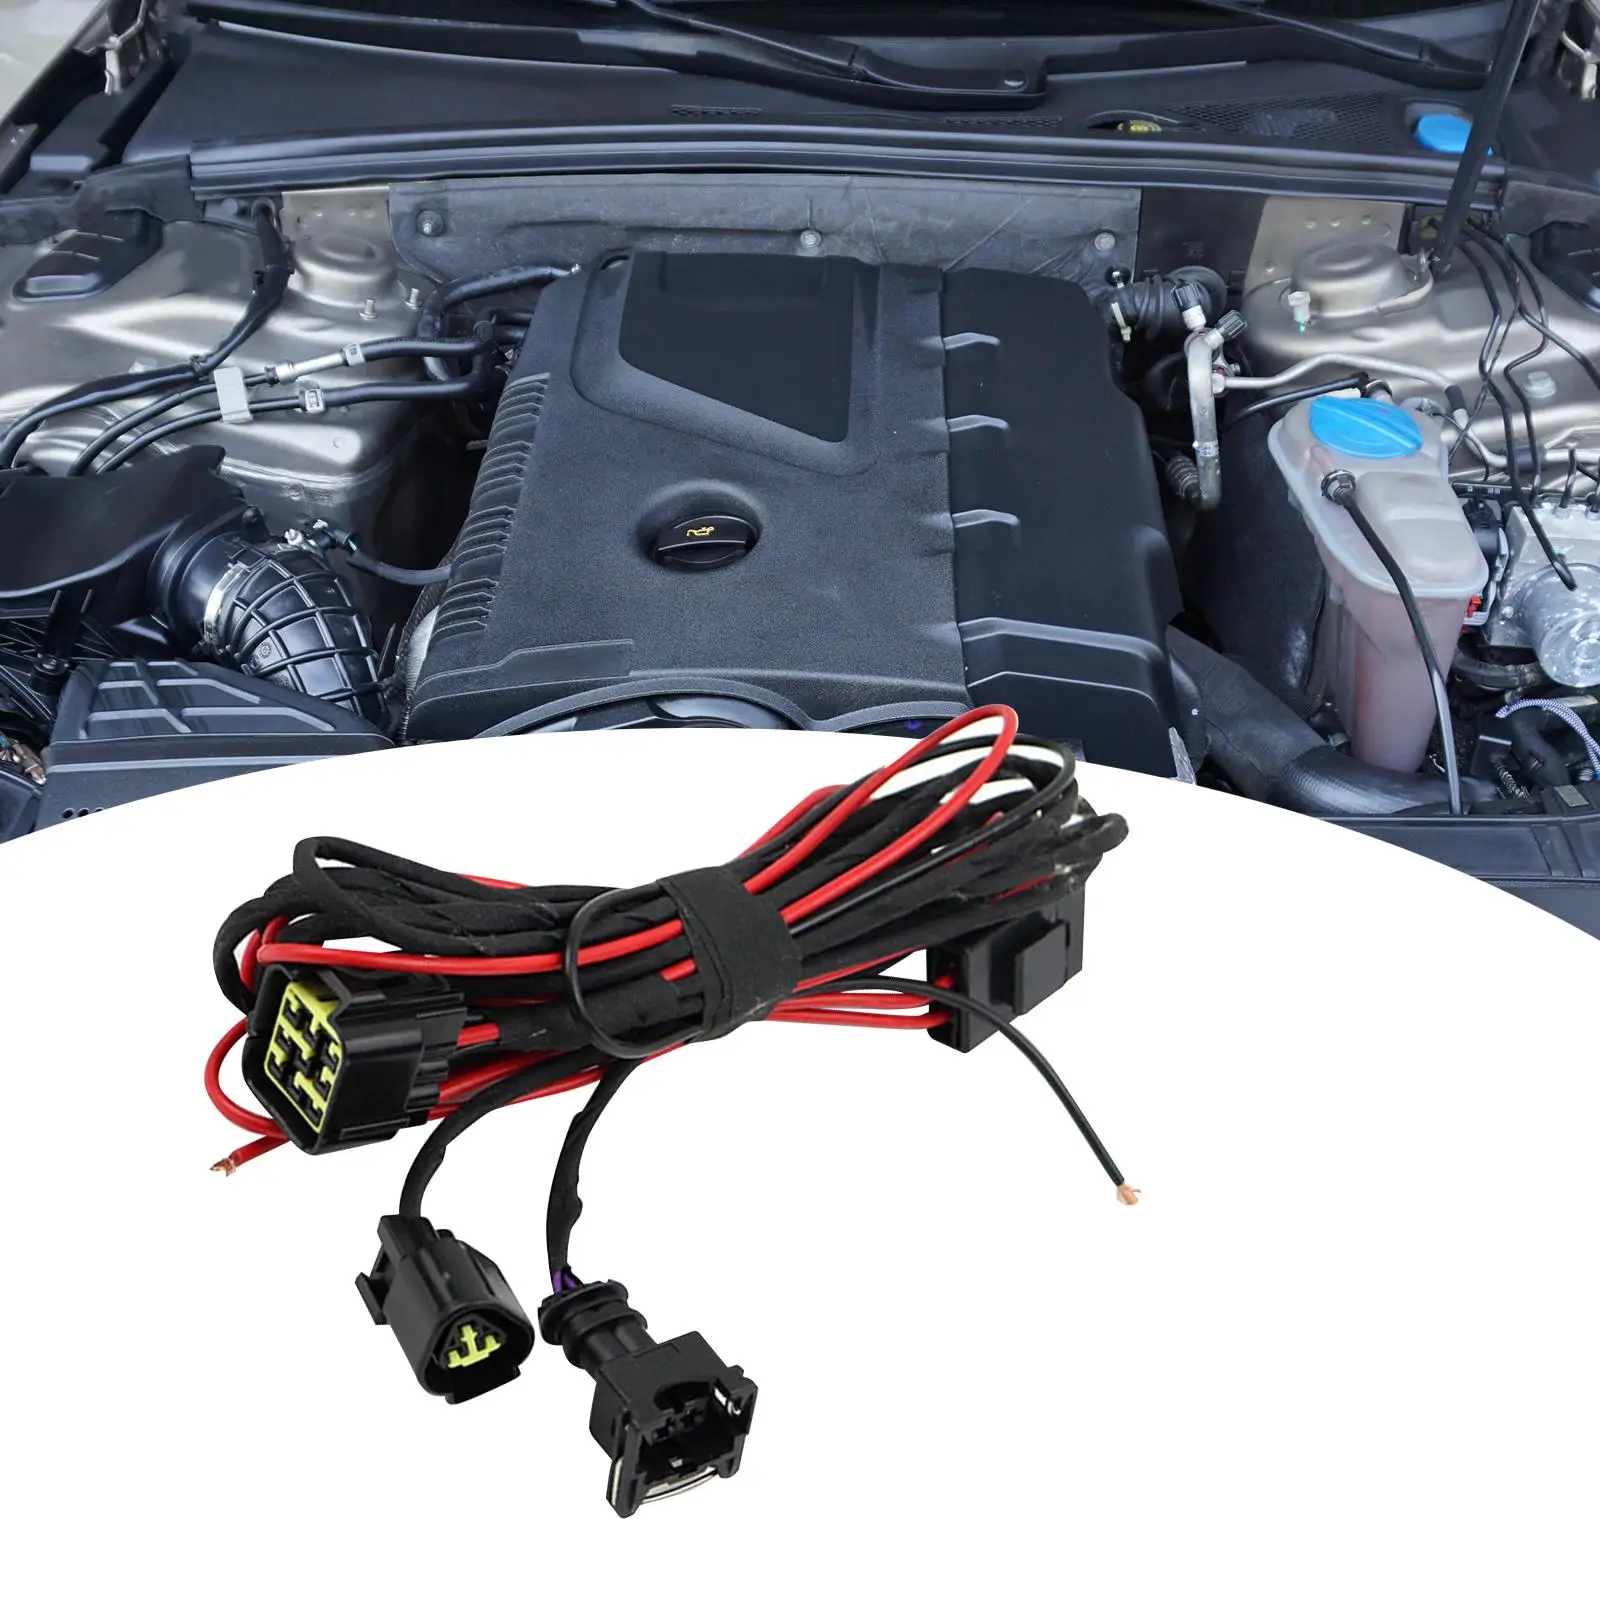 Heater Harness Replacement Car Truck Heater Parts Assembly for Lorries Caravans Campers Car Parking Diesel Air Heater